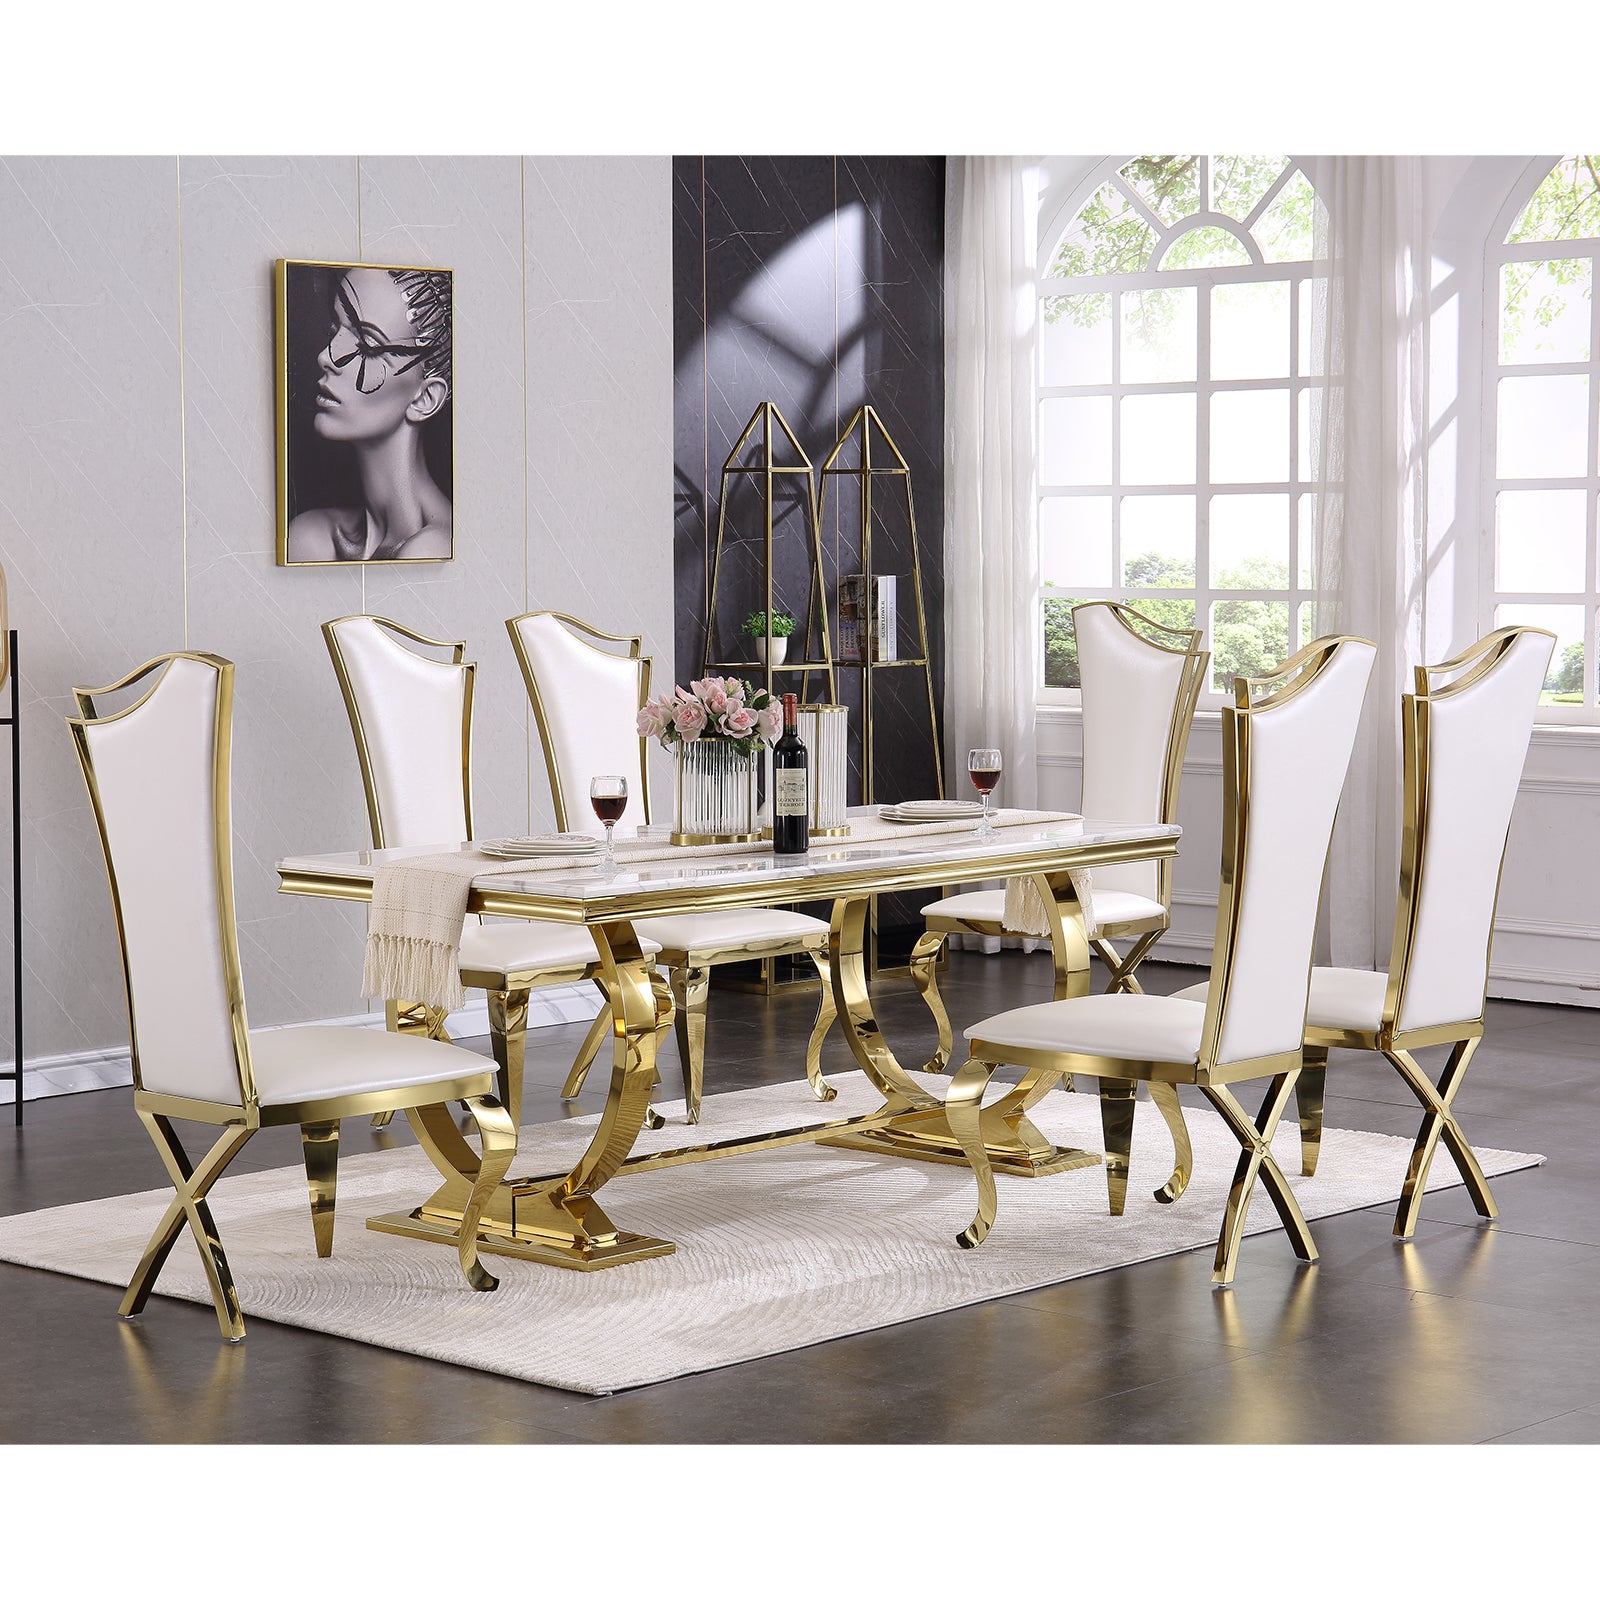 Wholesale White Leather Upholstered Dining Chairs with Gold Metal Legs